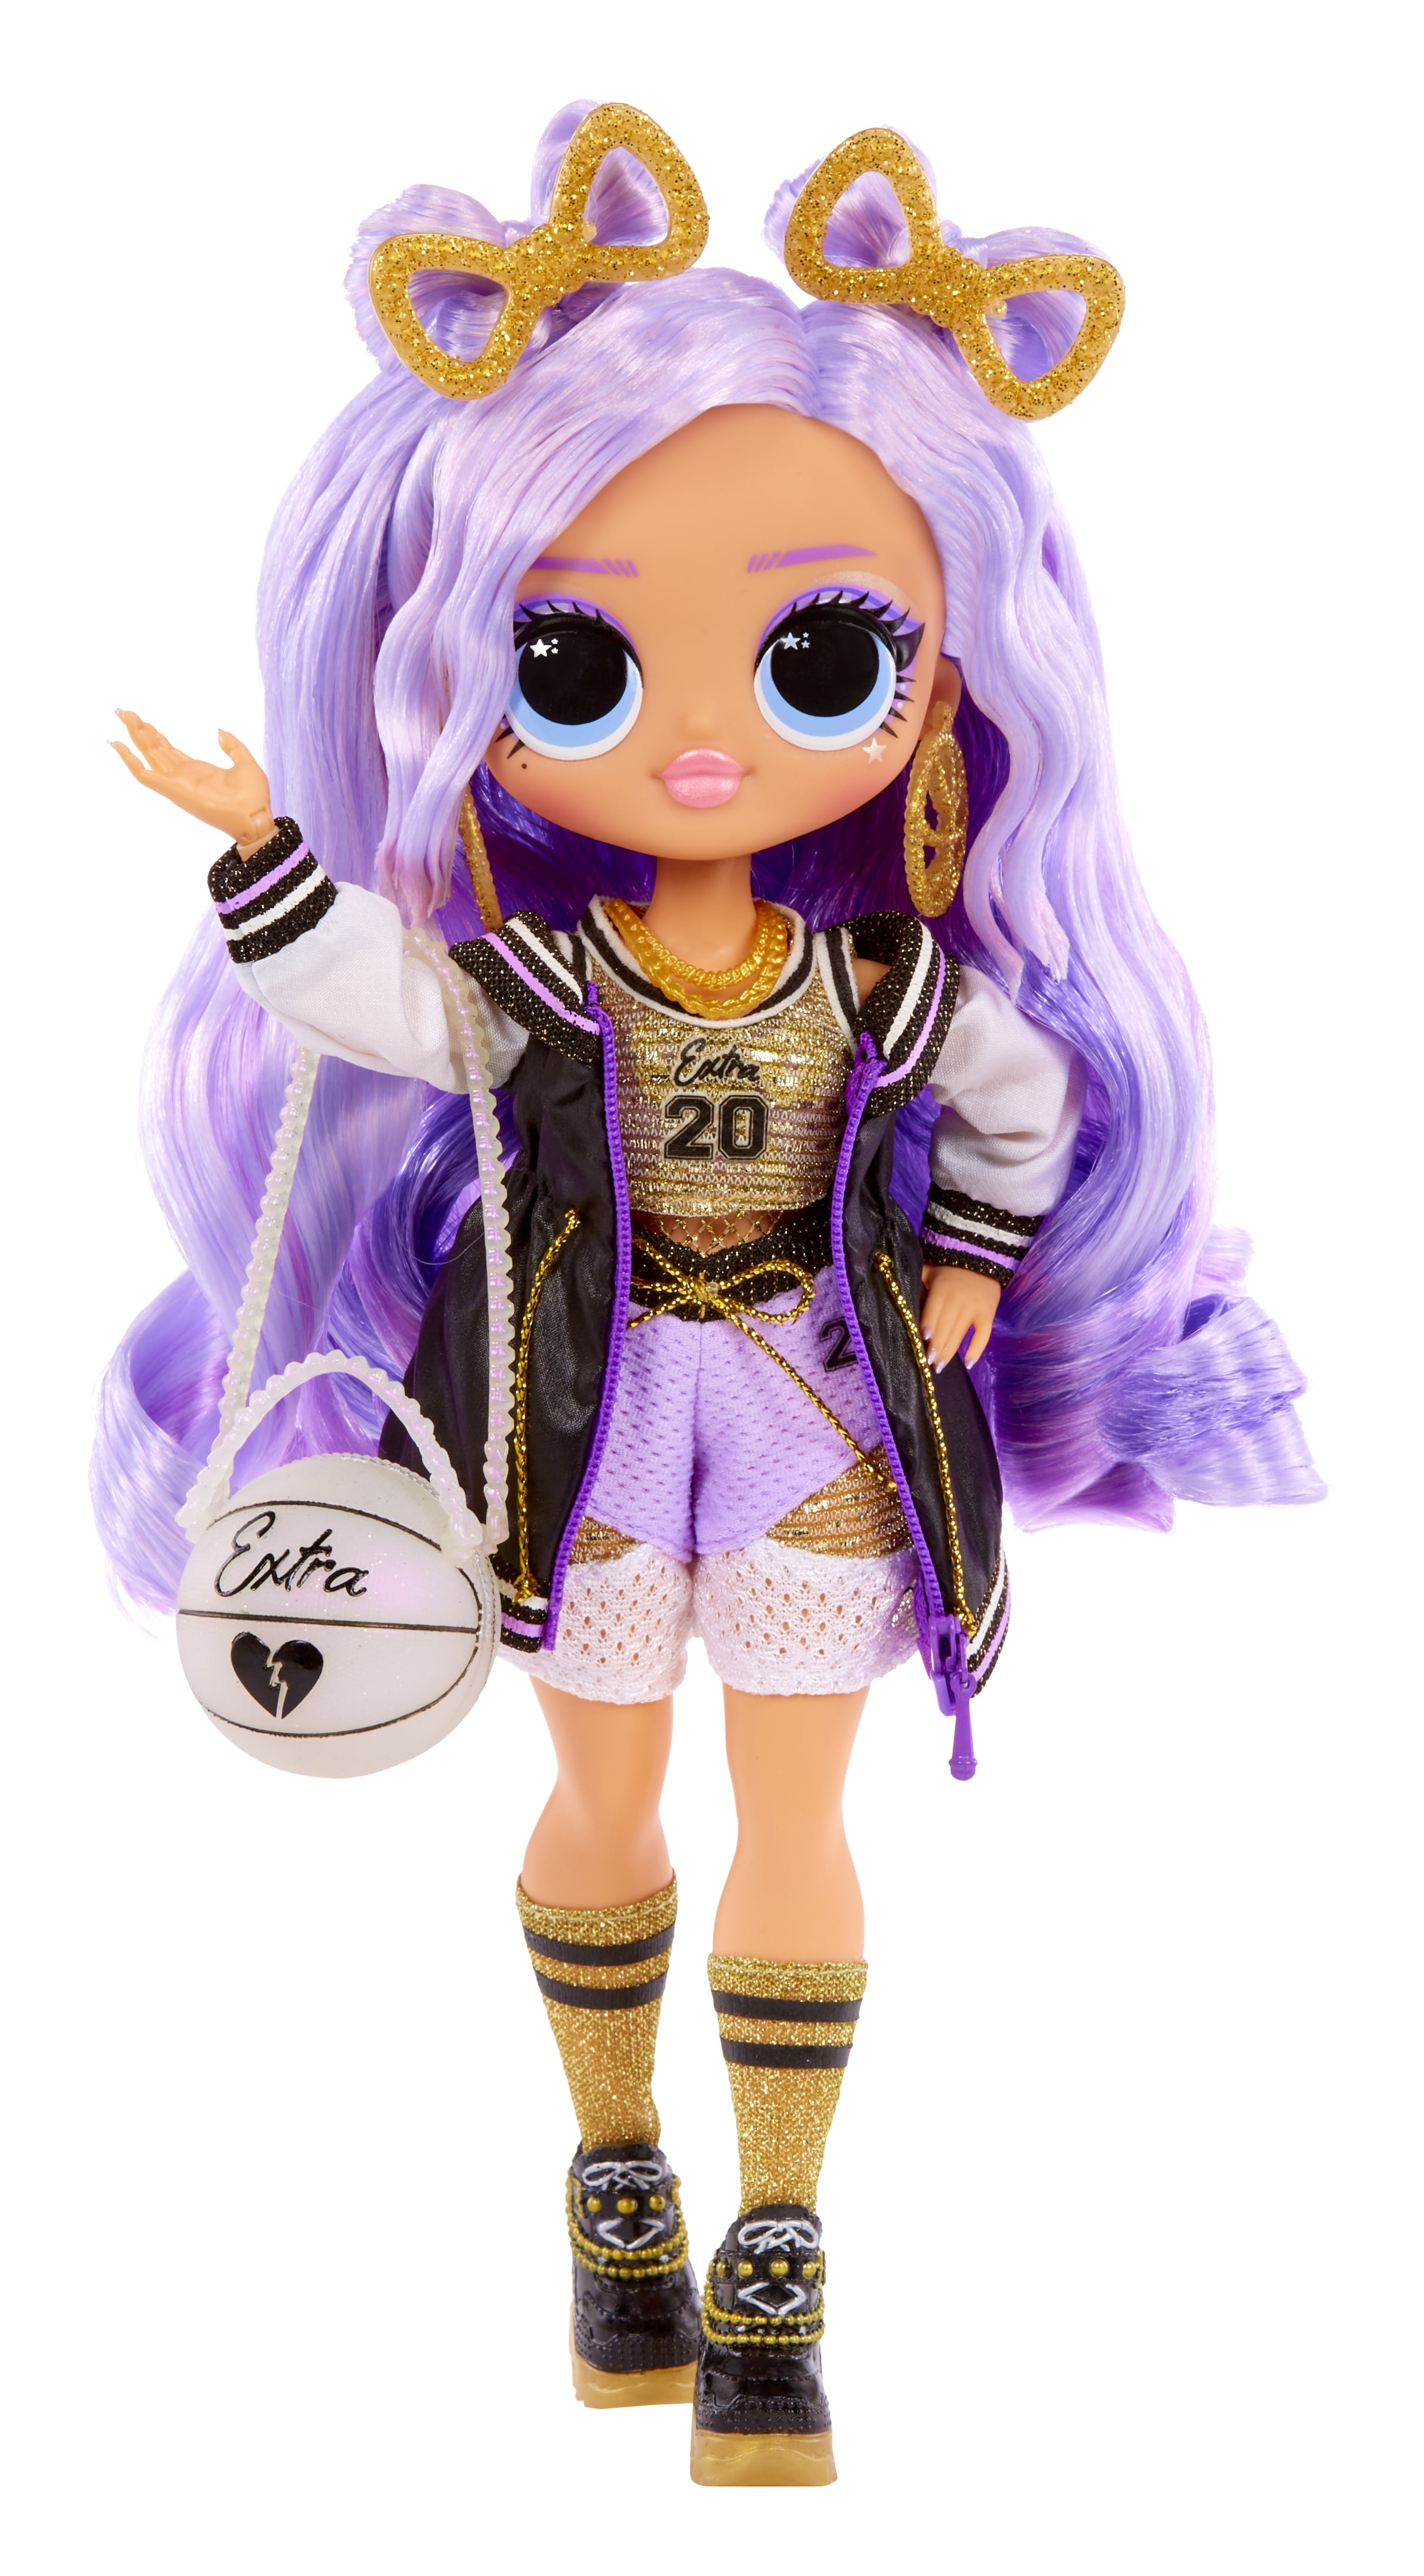 L.O.L Surprise! LOL Surprise OMG Sports Fashion Doll Sparkle Star with 20 Surprises Including Multiple Fashion & Sports Accessories – Great Gift for Kids Ages 4+